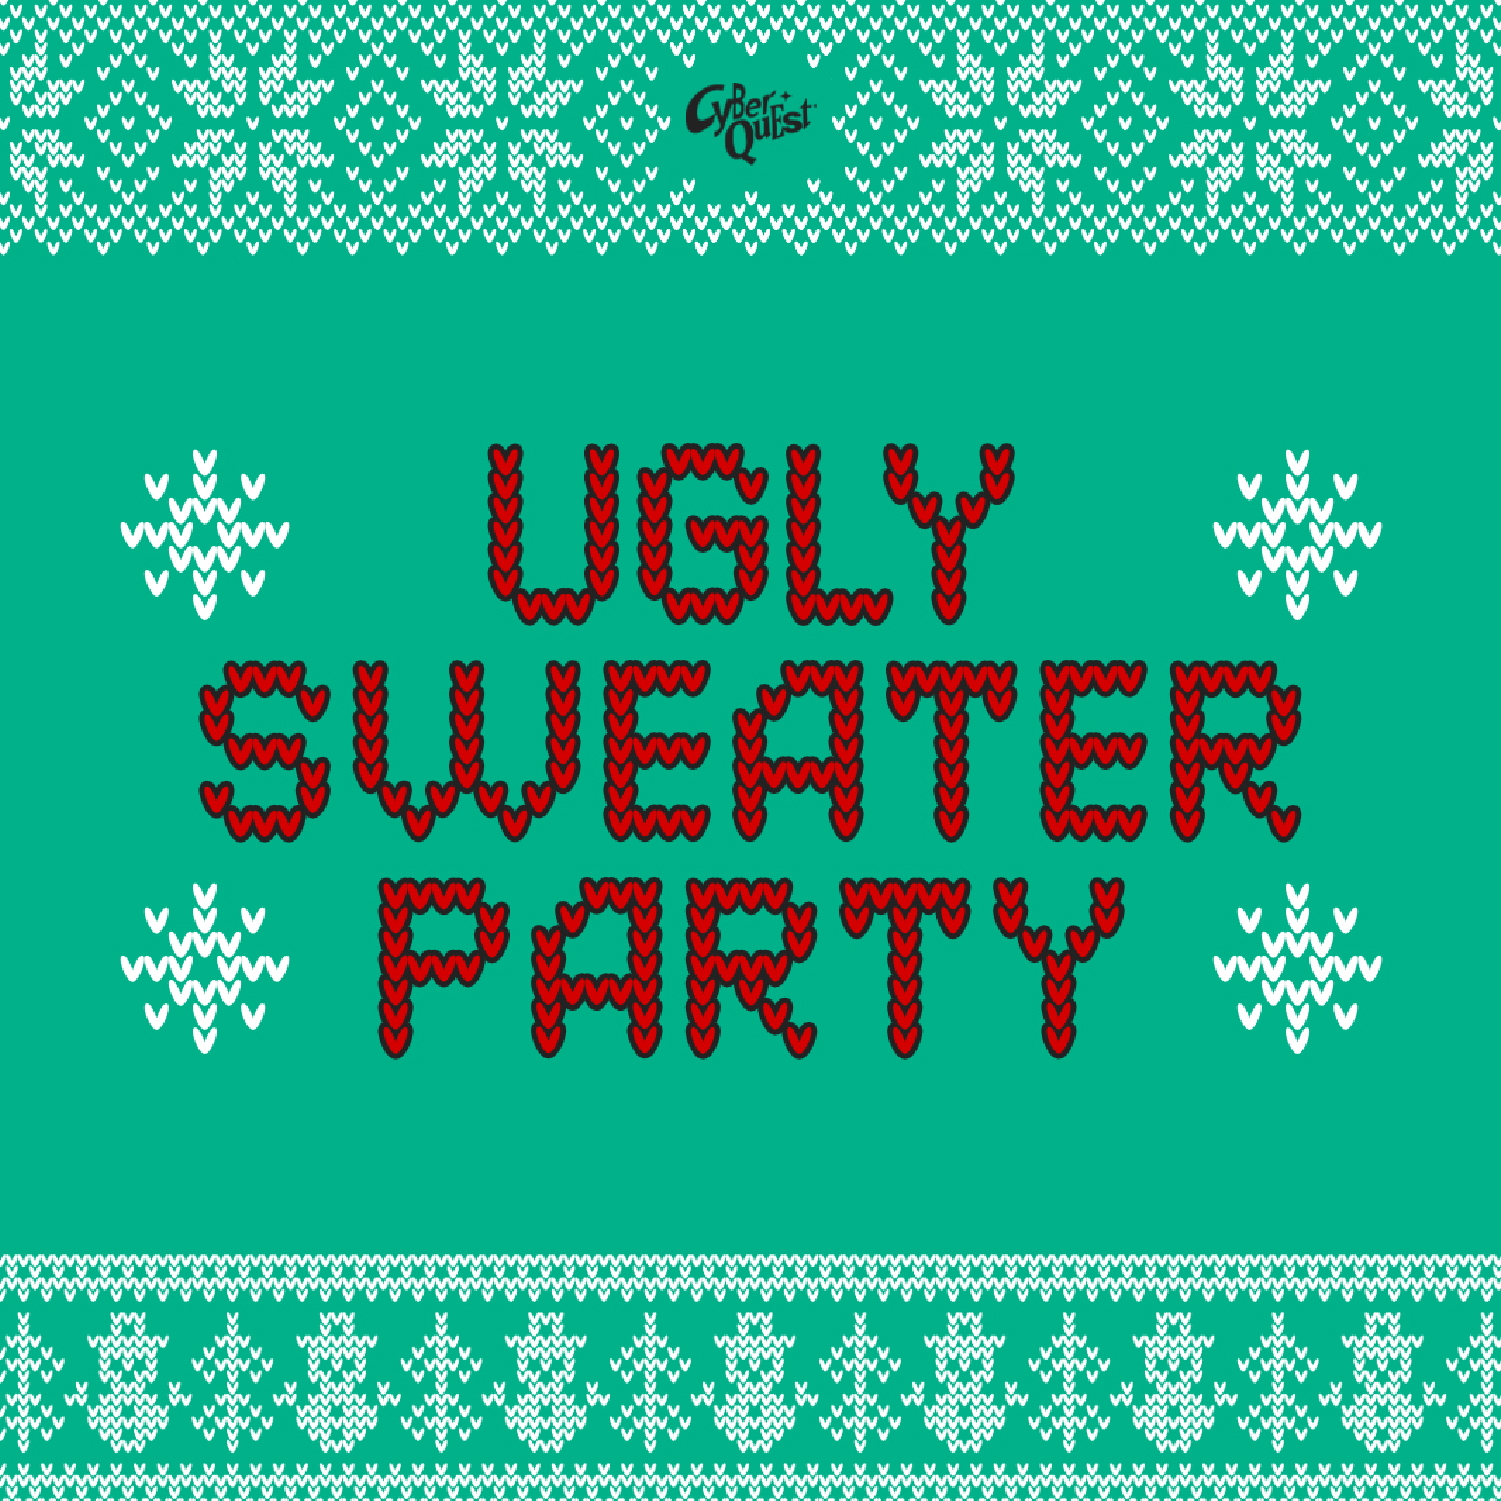 Ugly Sweater Party at Cyber Quest